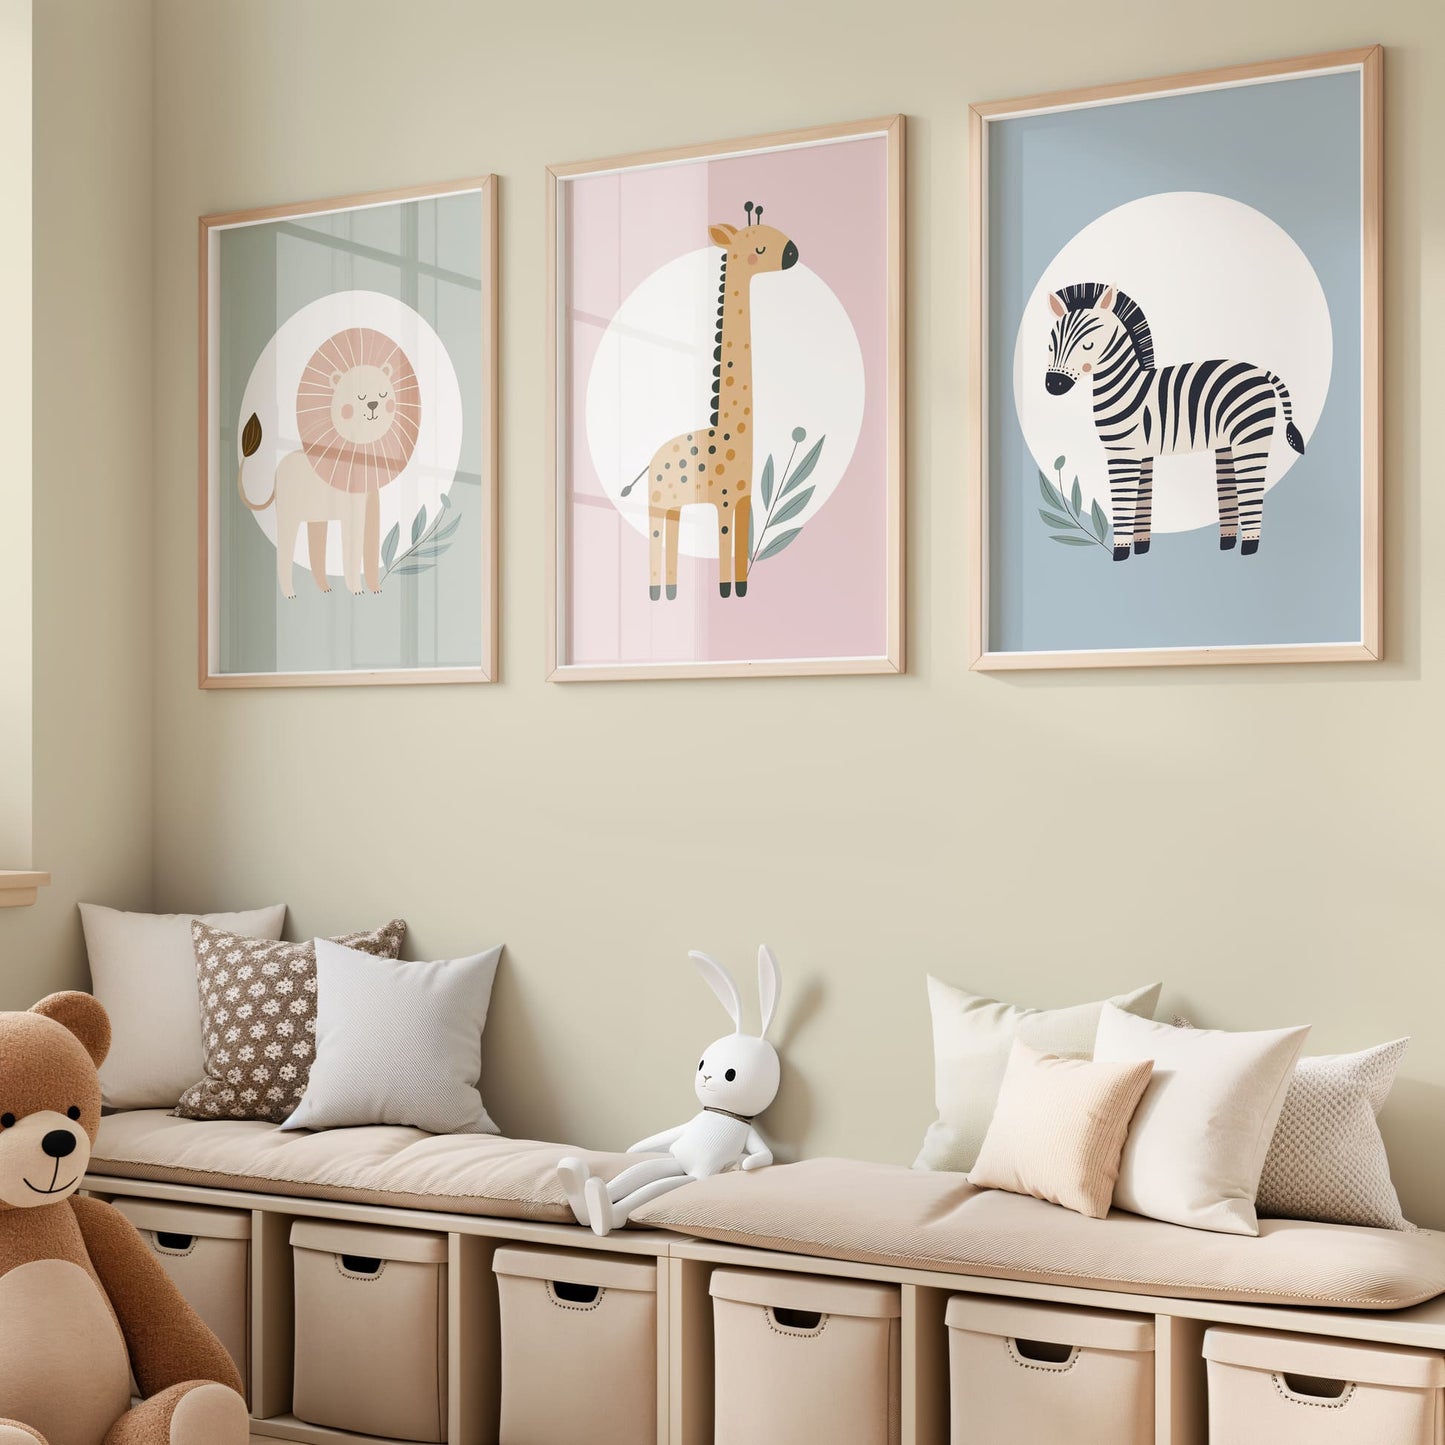 Set of three A4 prints featuring minimalist illustrations in muted tones. Each print depicts a different animal: a lion sitting on a Sage Green and white background, a giraffe sitting on a dusty pink and white background, a zebra on a pale blue and white background.